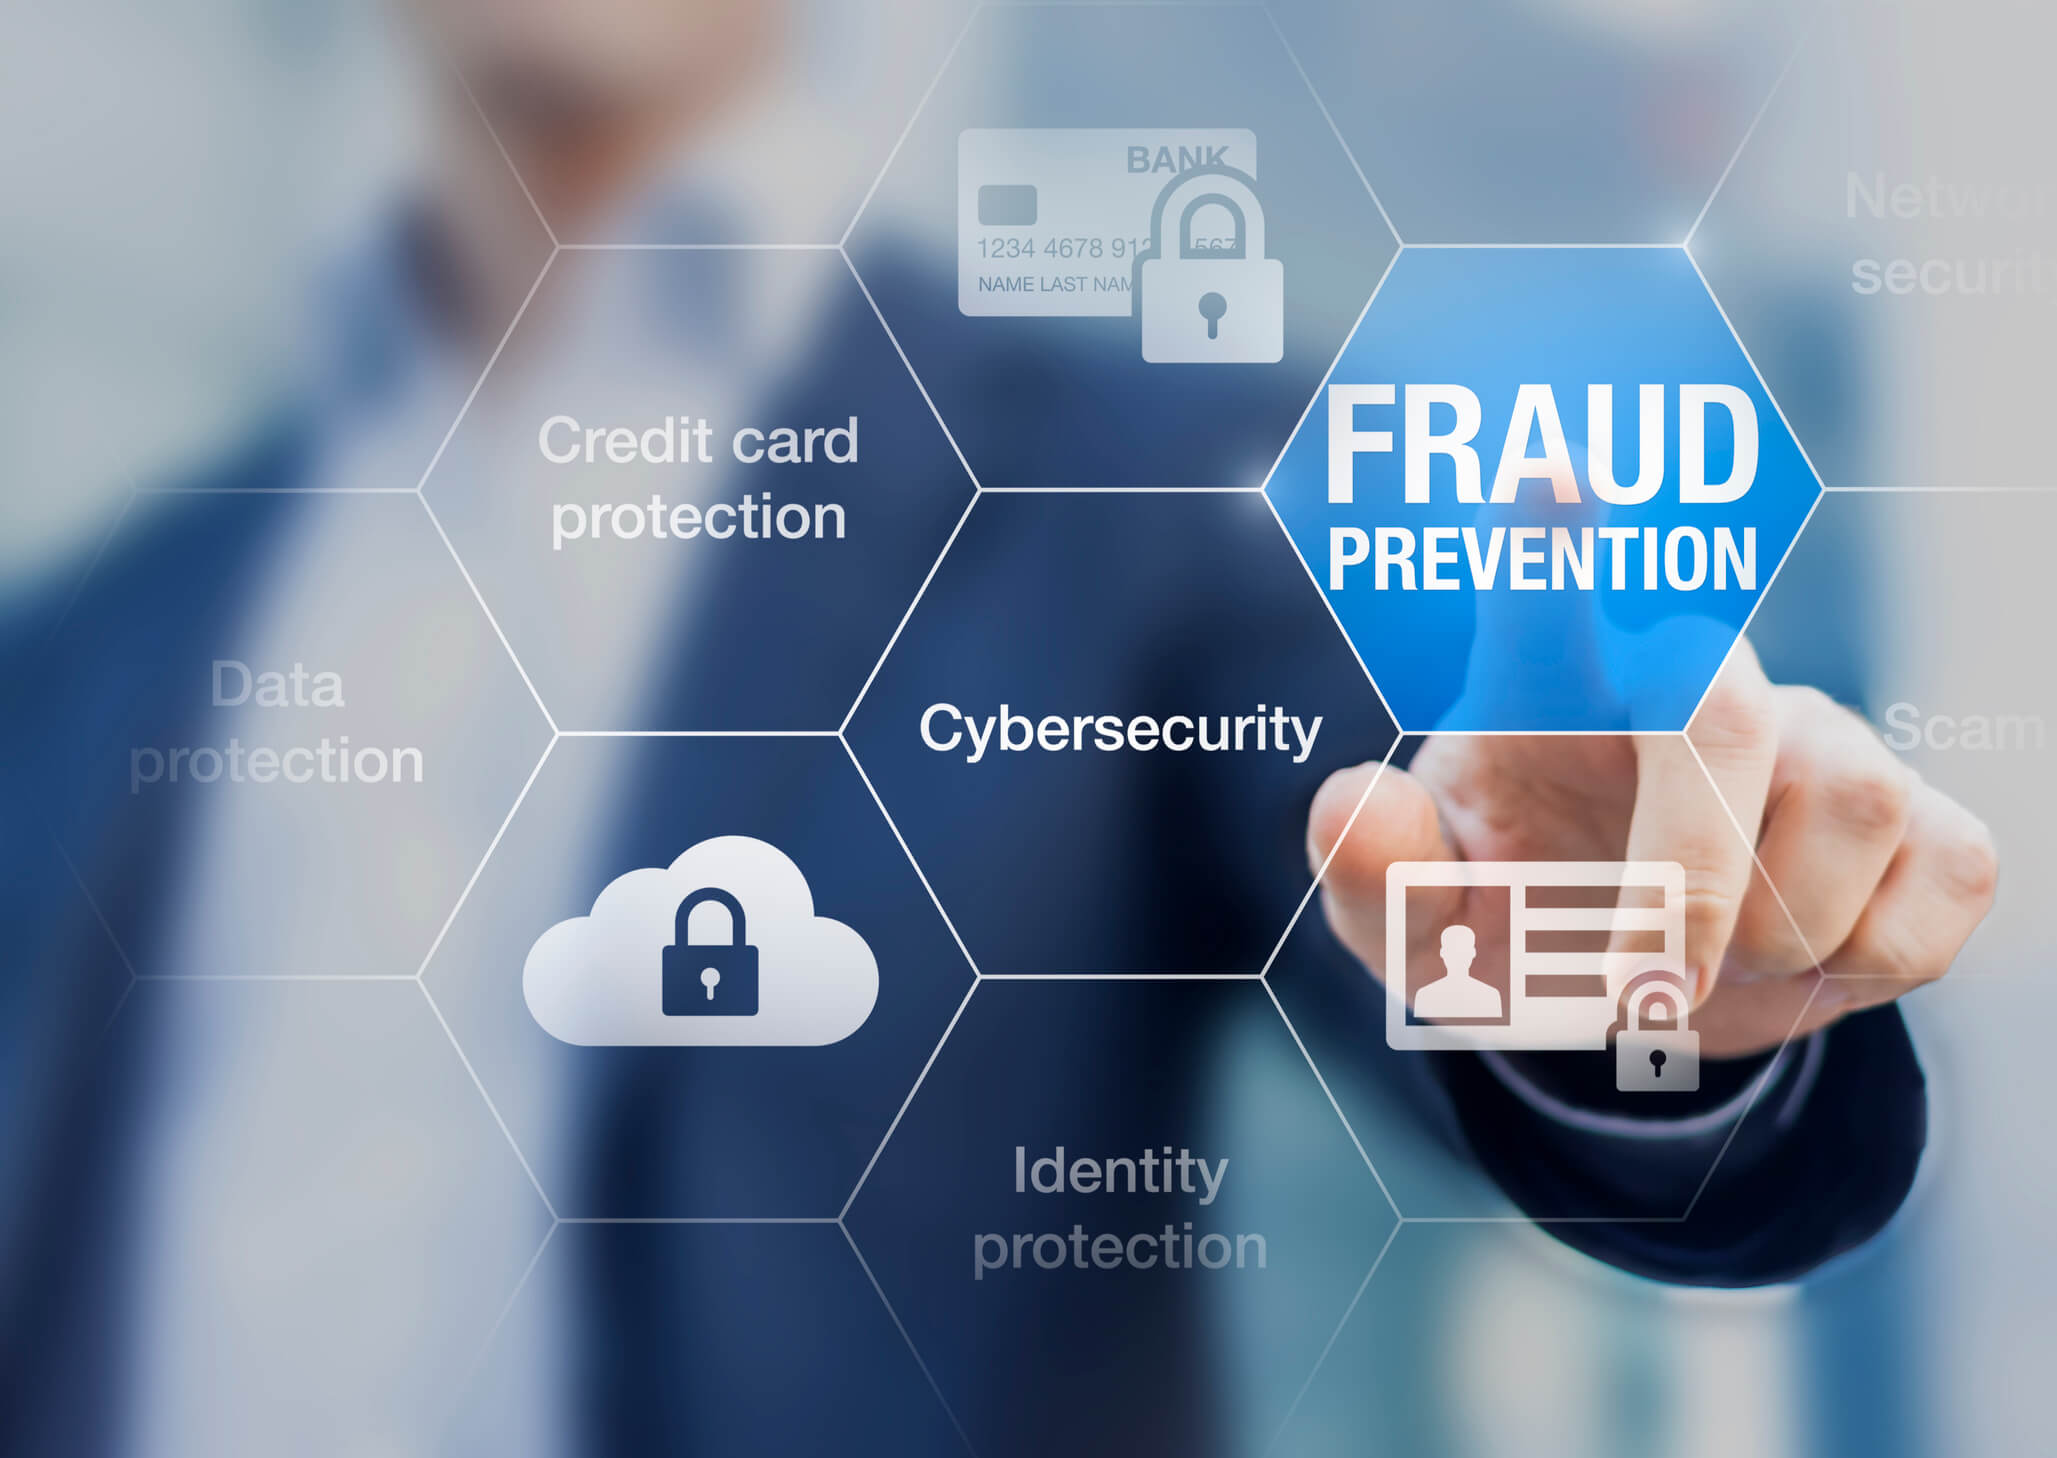 fraud prevention - Complete Controller